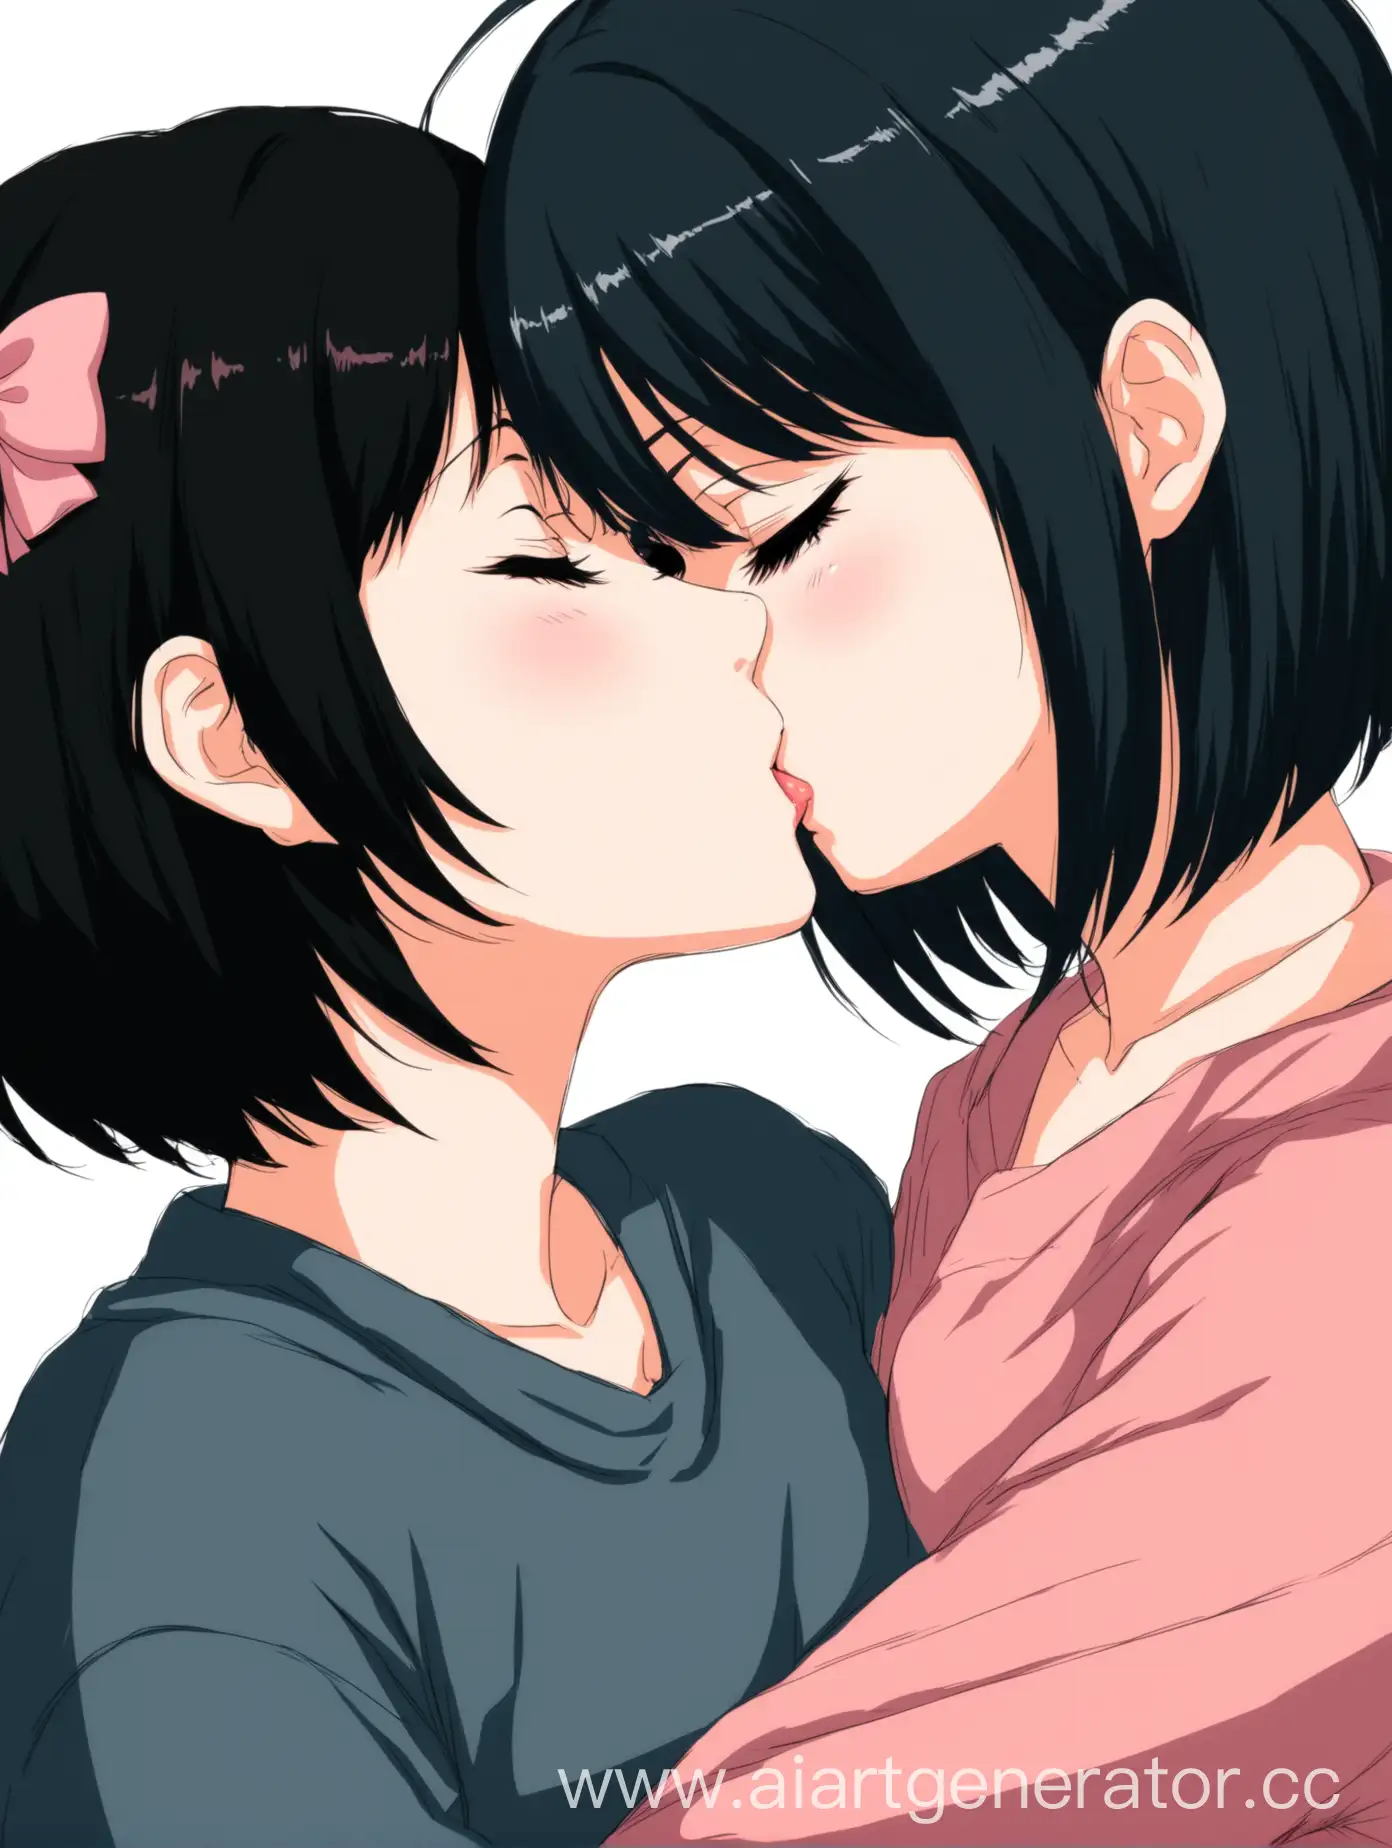 Affectionate-Anime-Girls-with-Pink-and-Black-Hair-Embracing